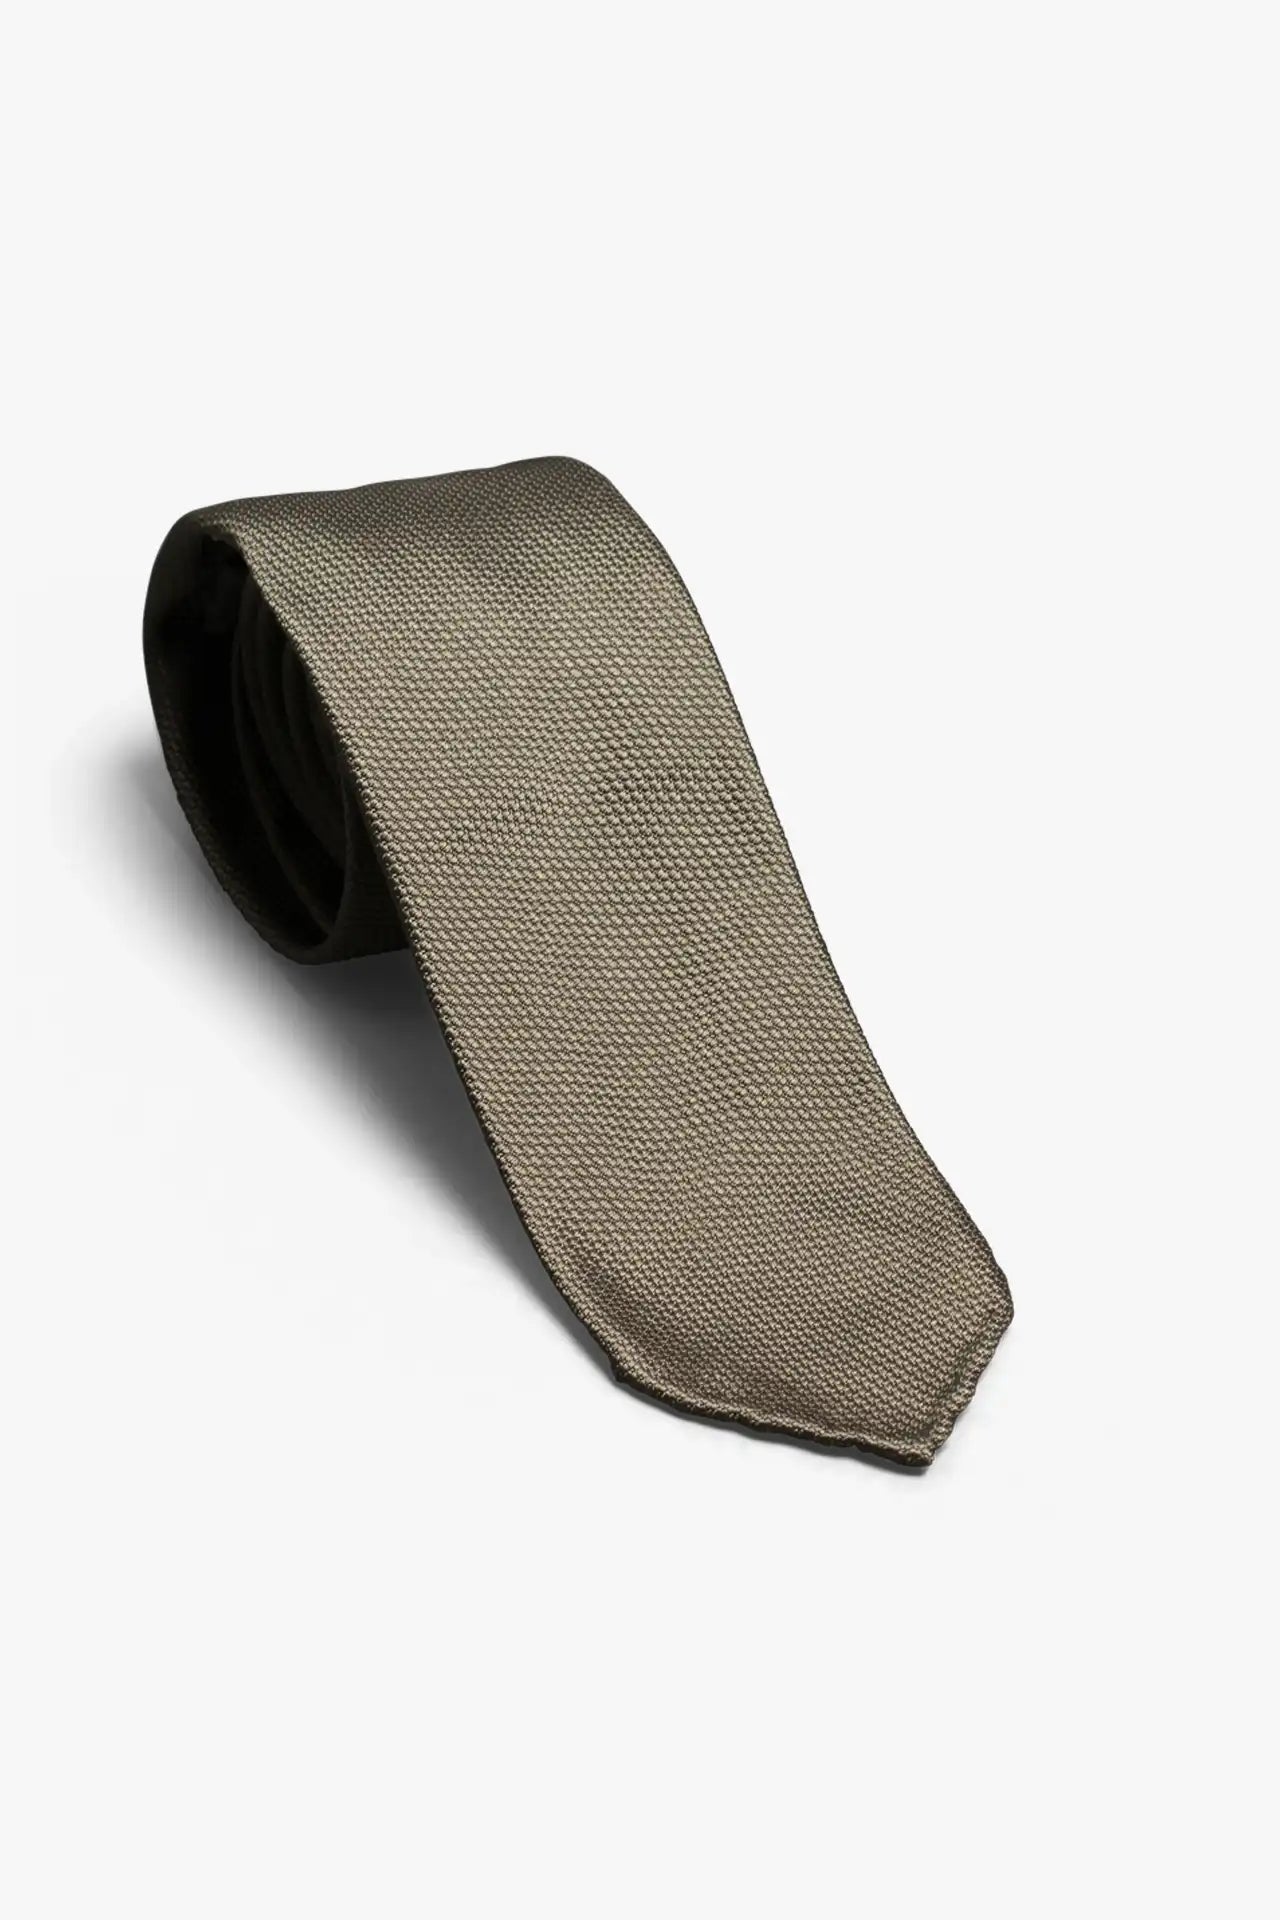 The Solid 3 fold Tie - Moss Green